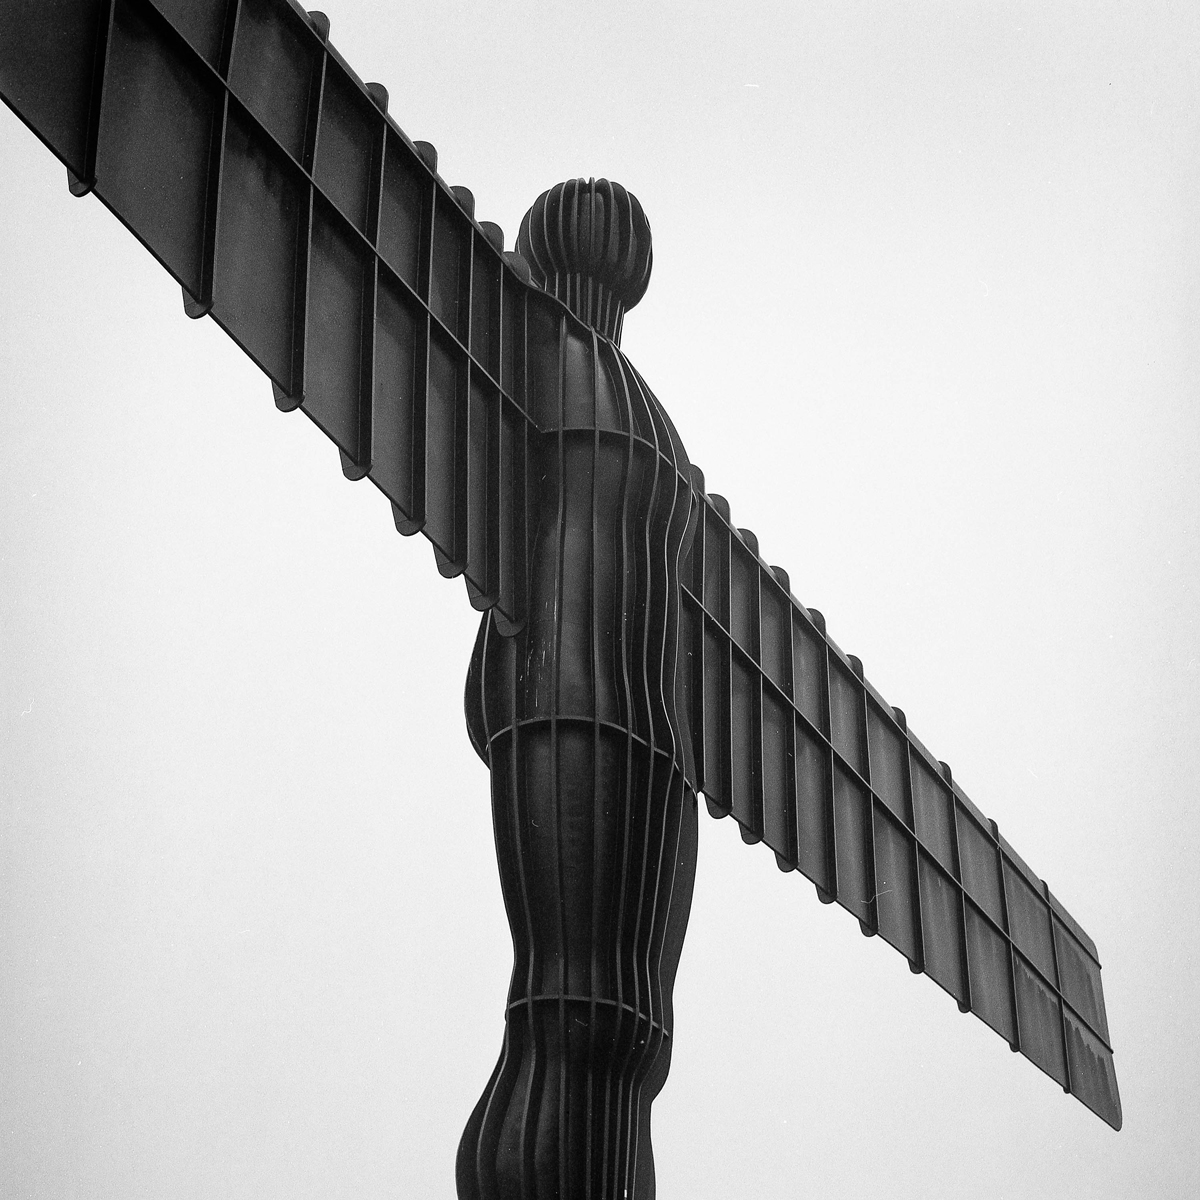 2020-06-29-v-d100-012.jpg Angel of the North, 2019, Ilford Delta 100, Hasselblad 500C/M